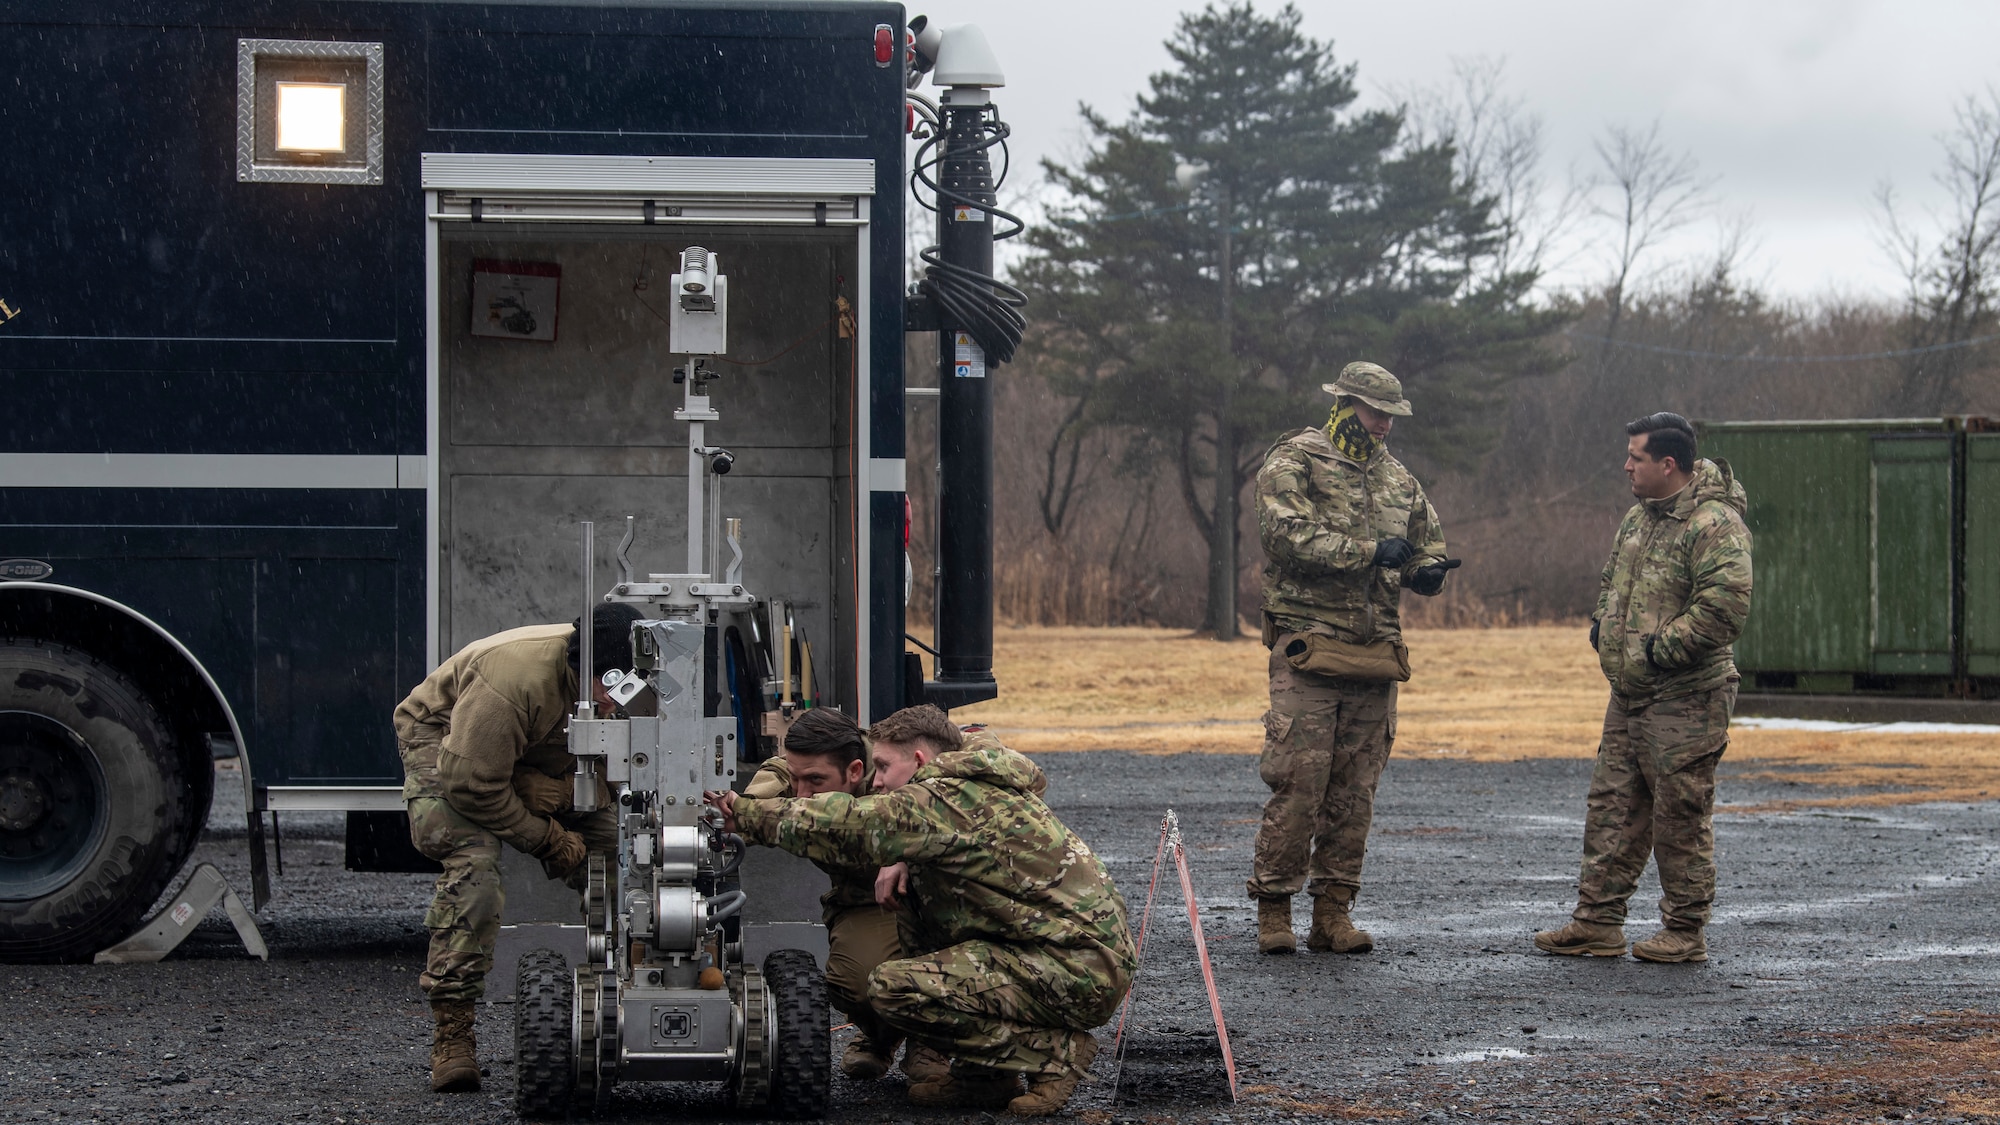 U.S. Airmen with the 35th Civil Engineer Squadron Explosive Ordnance Disposal team inspect an F6A robot at Misawa Air Base, Japan, March 3, 2020. The robot helps EOD Airmen dispose of potential explosives without putting human life at risk. (U.S. Air Force photo by Airman 1st Class China M. Shock)